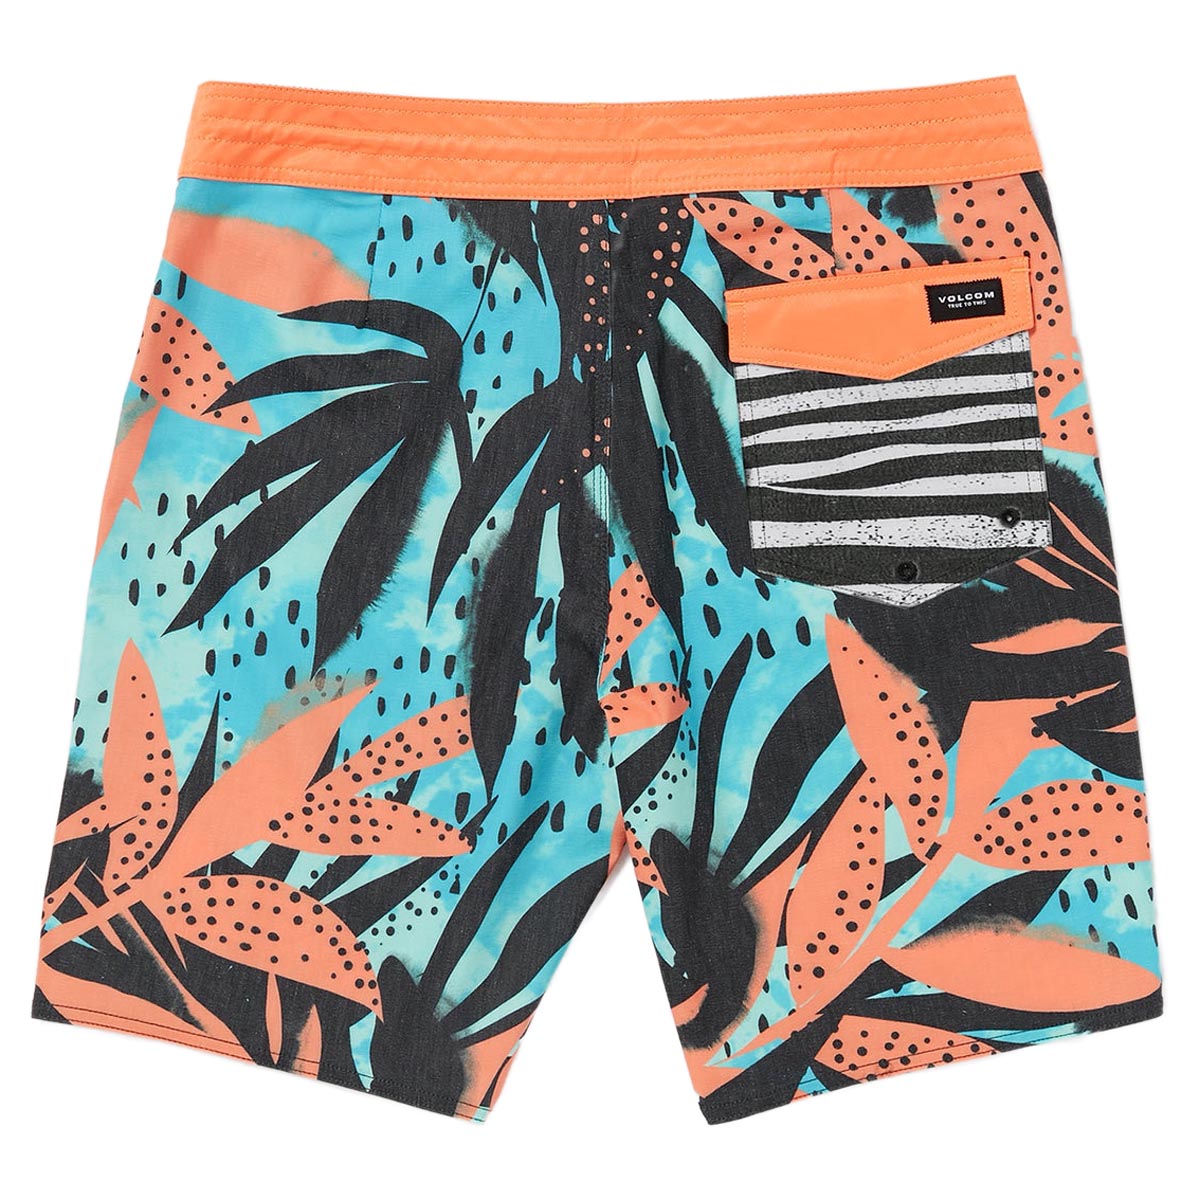 Volcom Waterside Floral Stoney 19 Board Shorts - Tigerlily image 2